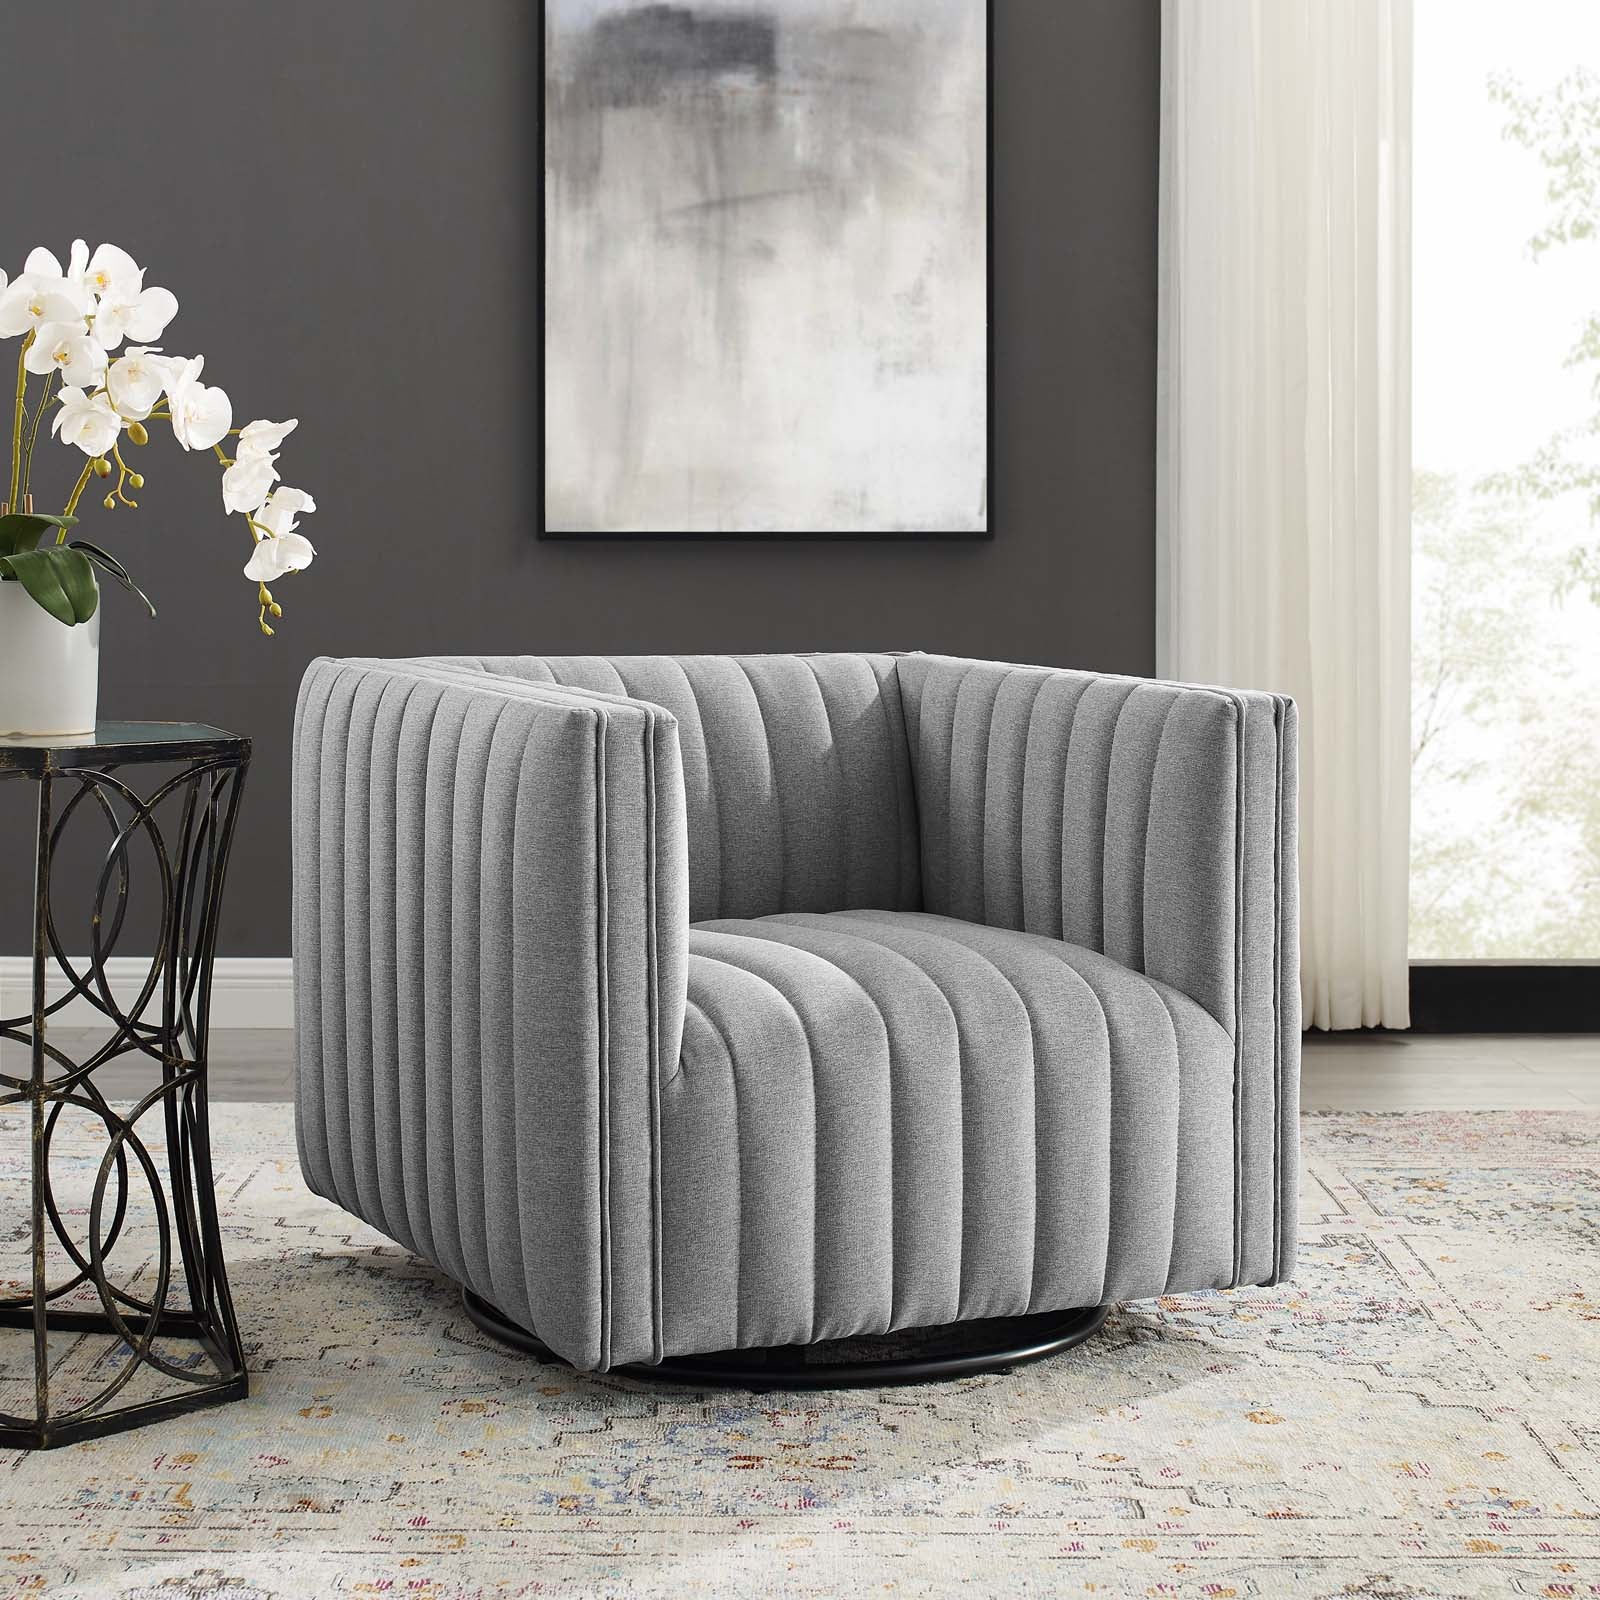 Modway Accent Chairs - Conjure-Tufted-Swivel-Upholstered-Armchair-Light-Gray